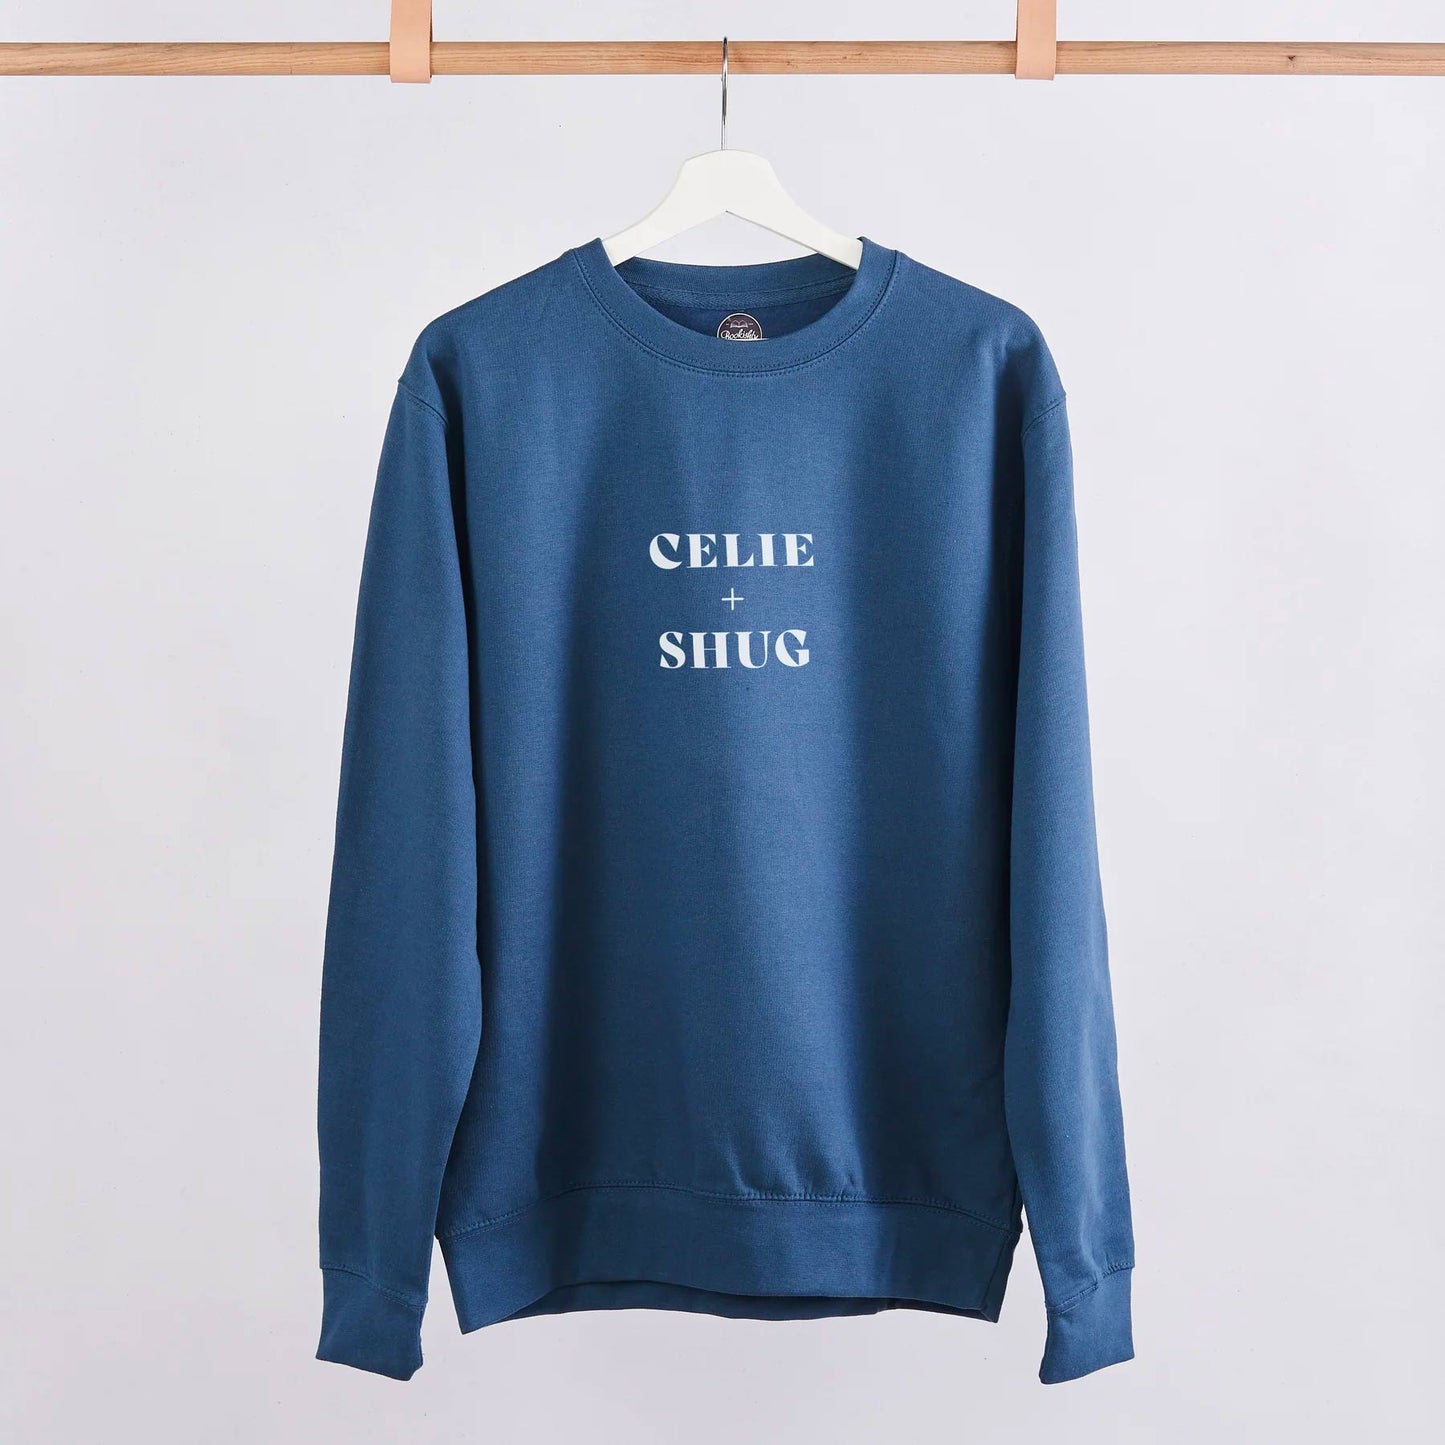 Sweatshirt Top - Literary Couples - Personalised - Your Choice!